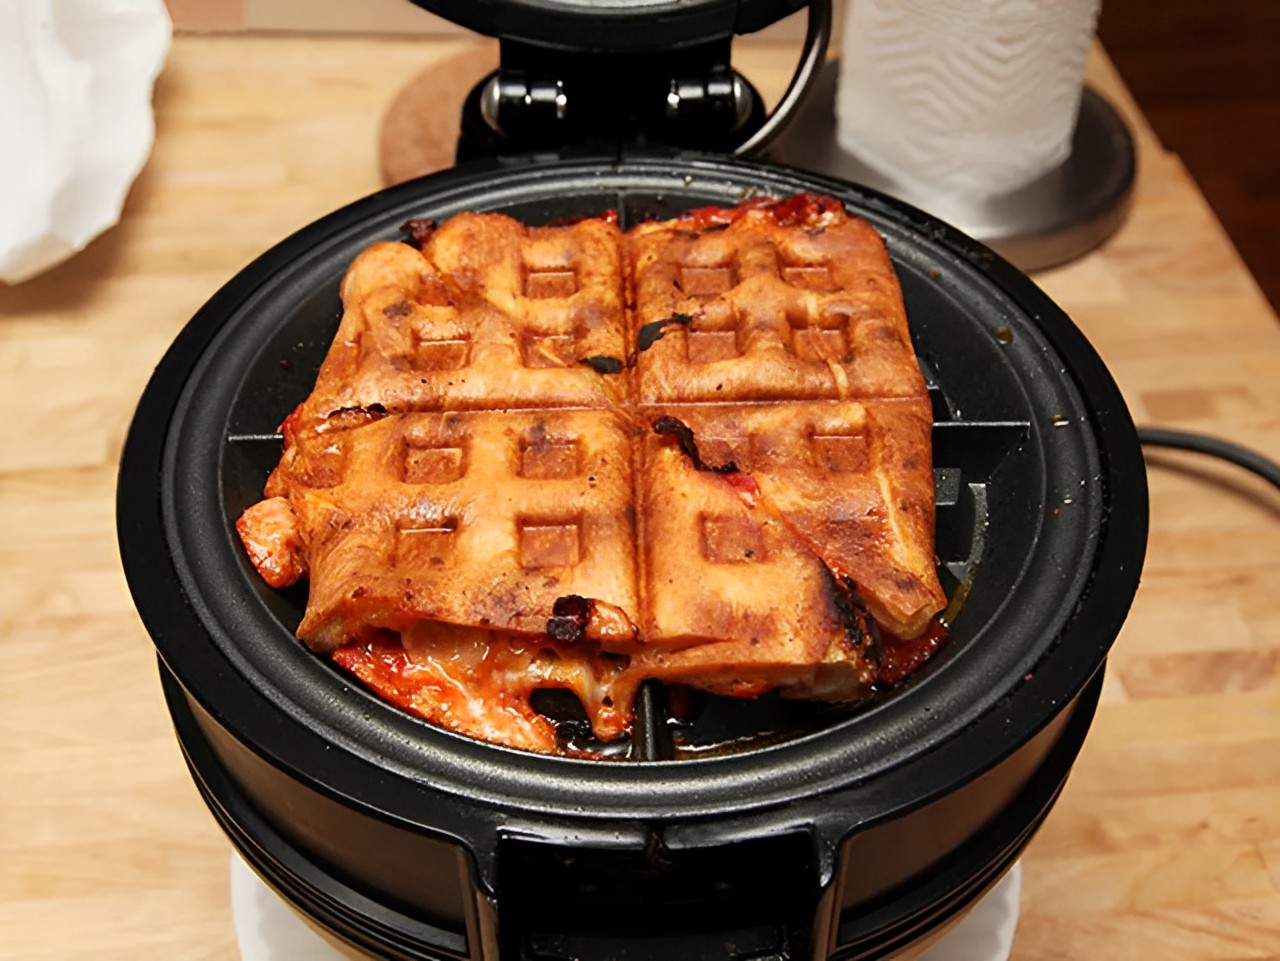 How To Reheat Pizza In Waffle Iron